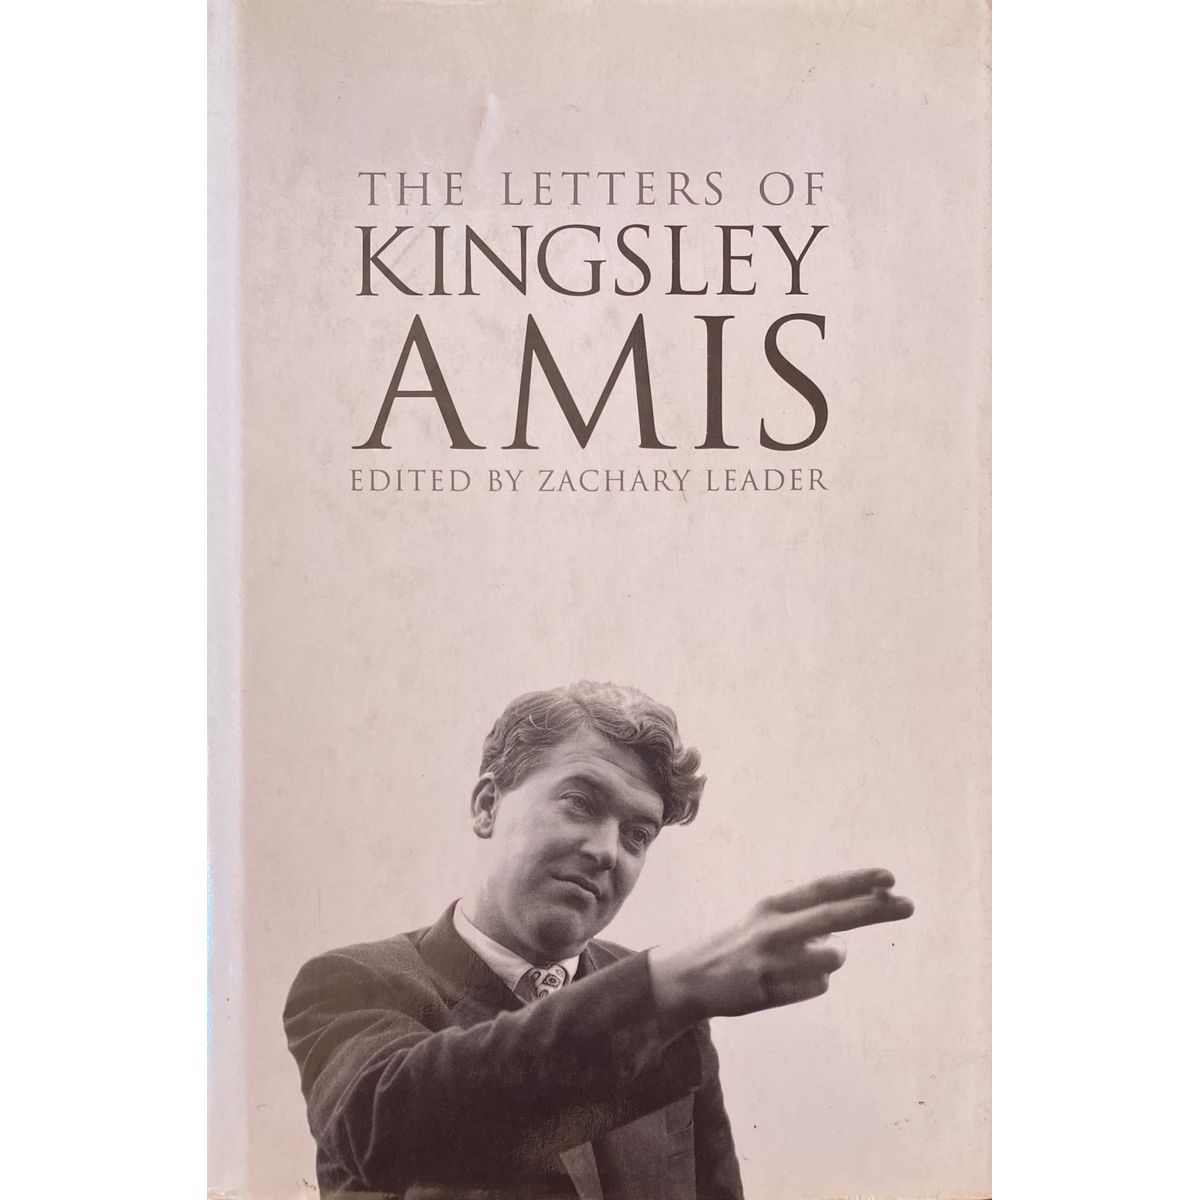 ISBN: 9780002570954 / 0002570955 - The Letters of Kingsley Amis by Kingsley Amis, edited by Zachary Leader [2000]